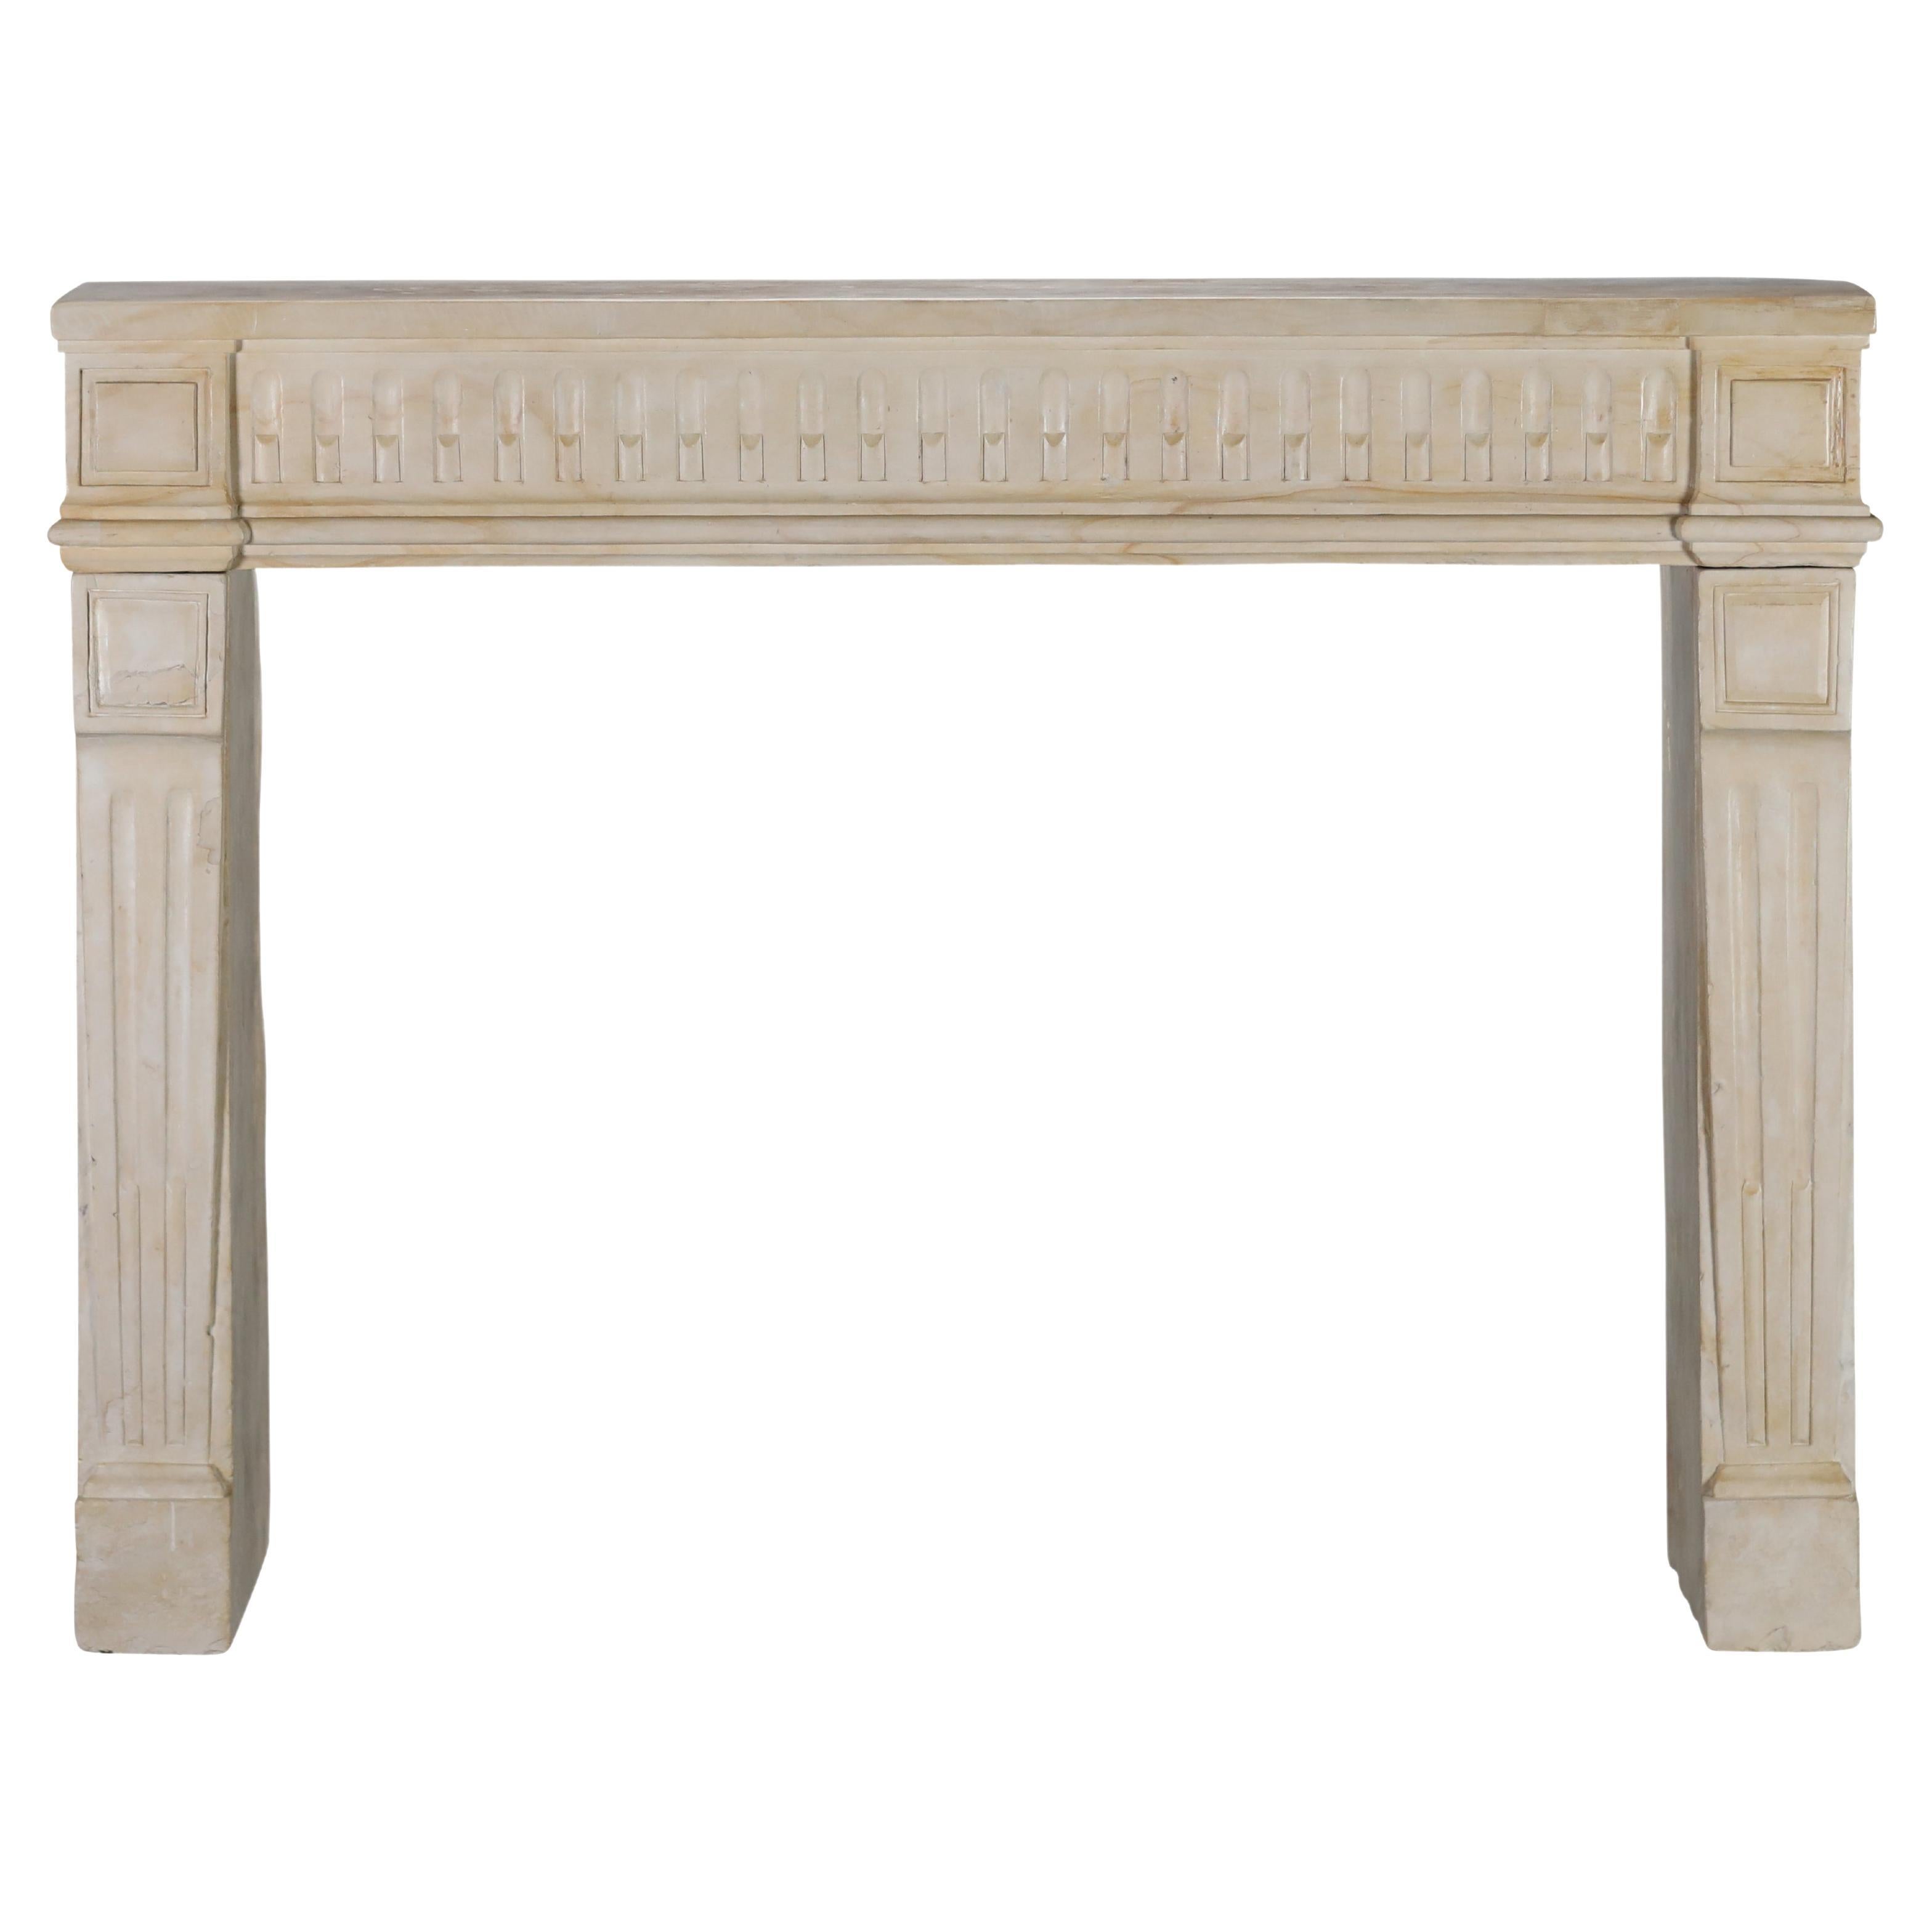 Classy Chic 18th Century Limestone Fireplace For Exclusive Interior Project For Sale